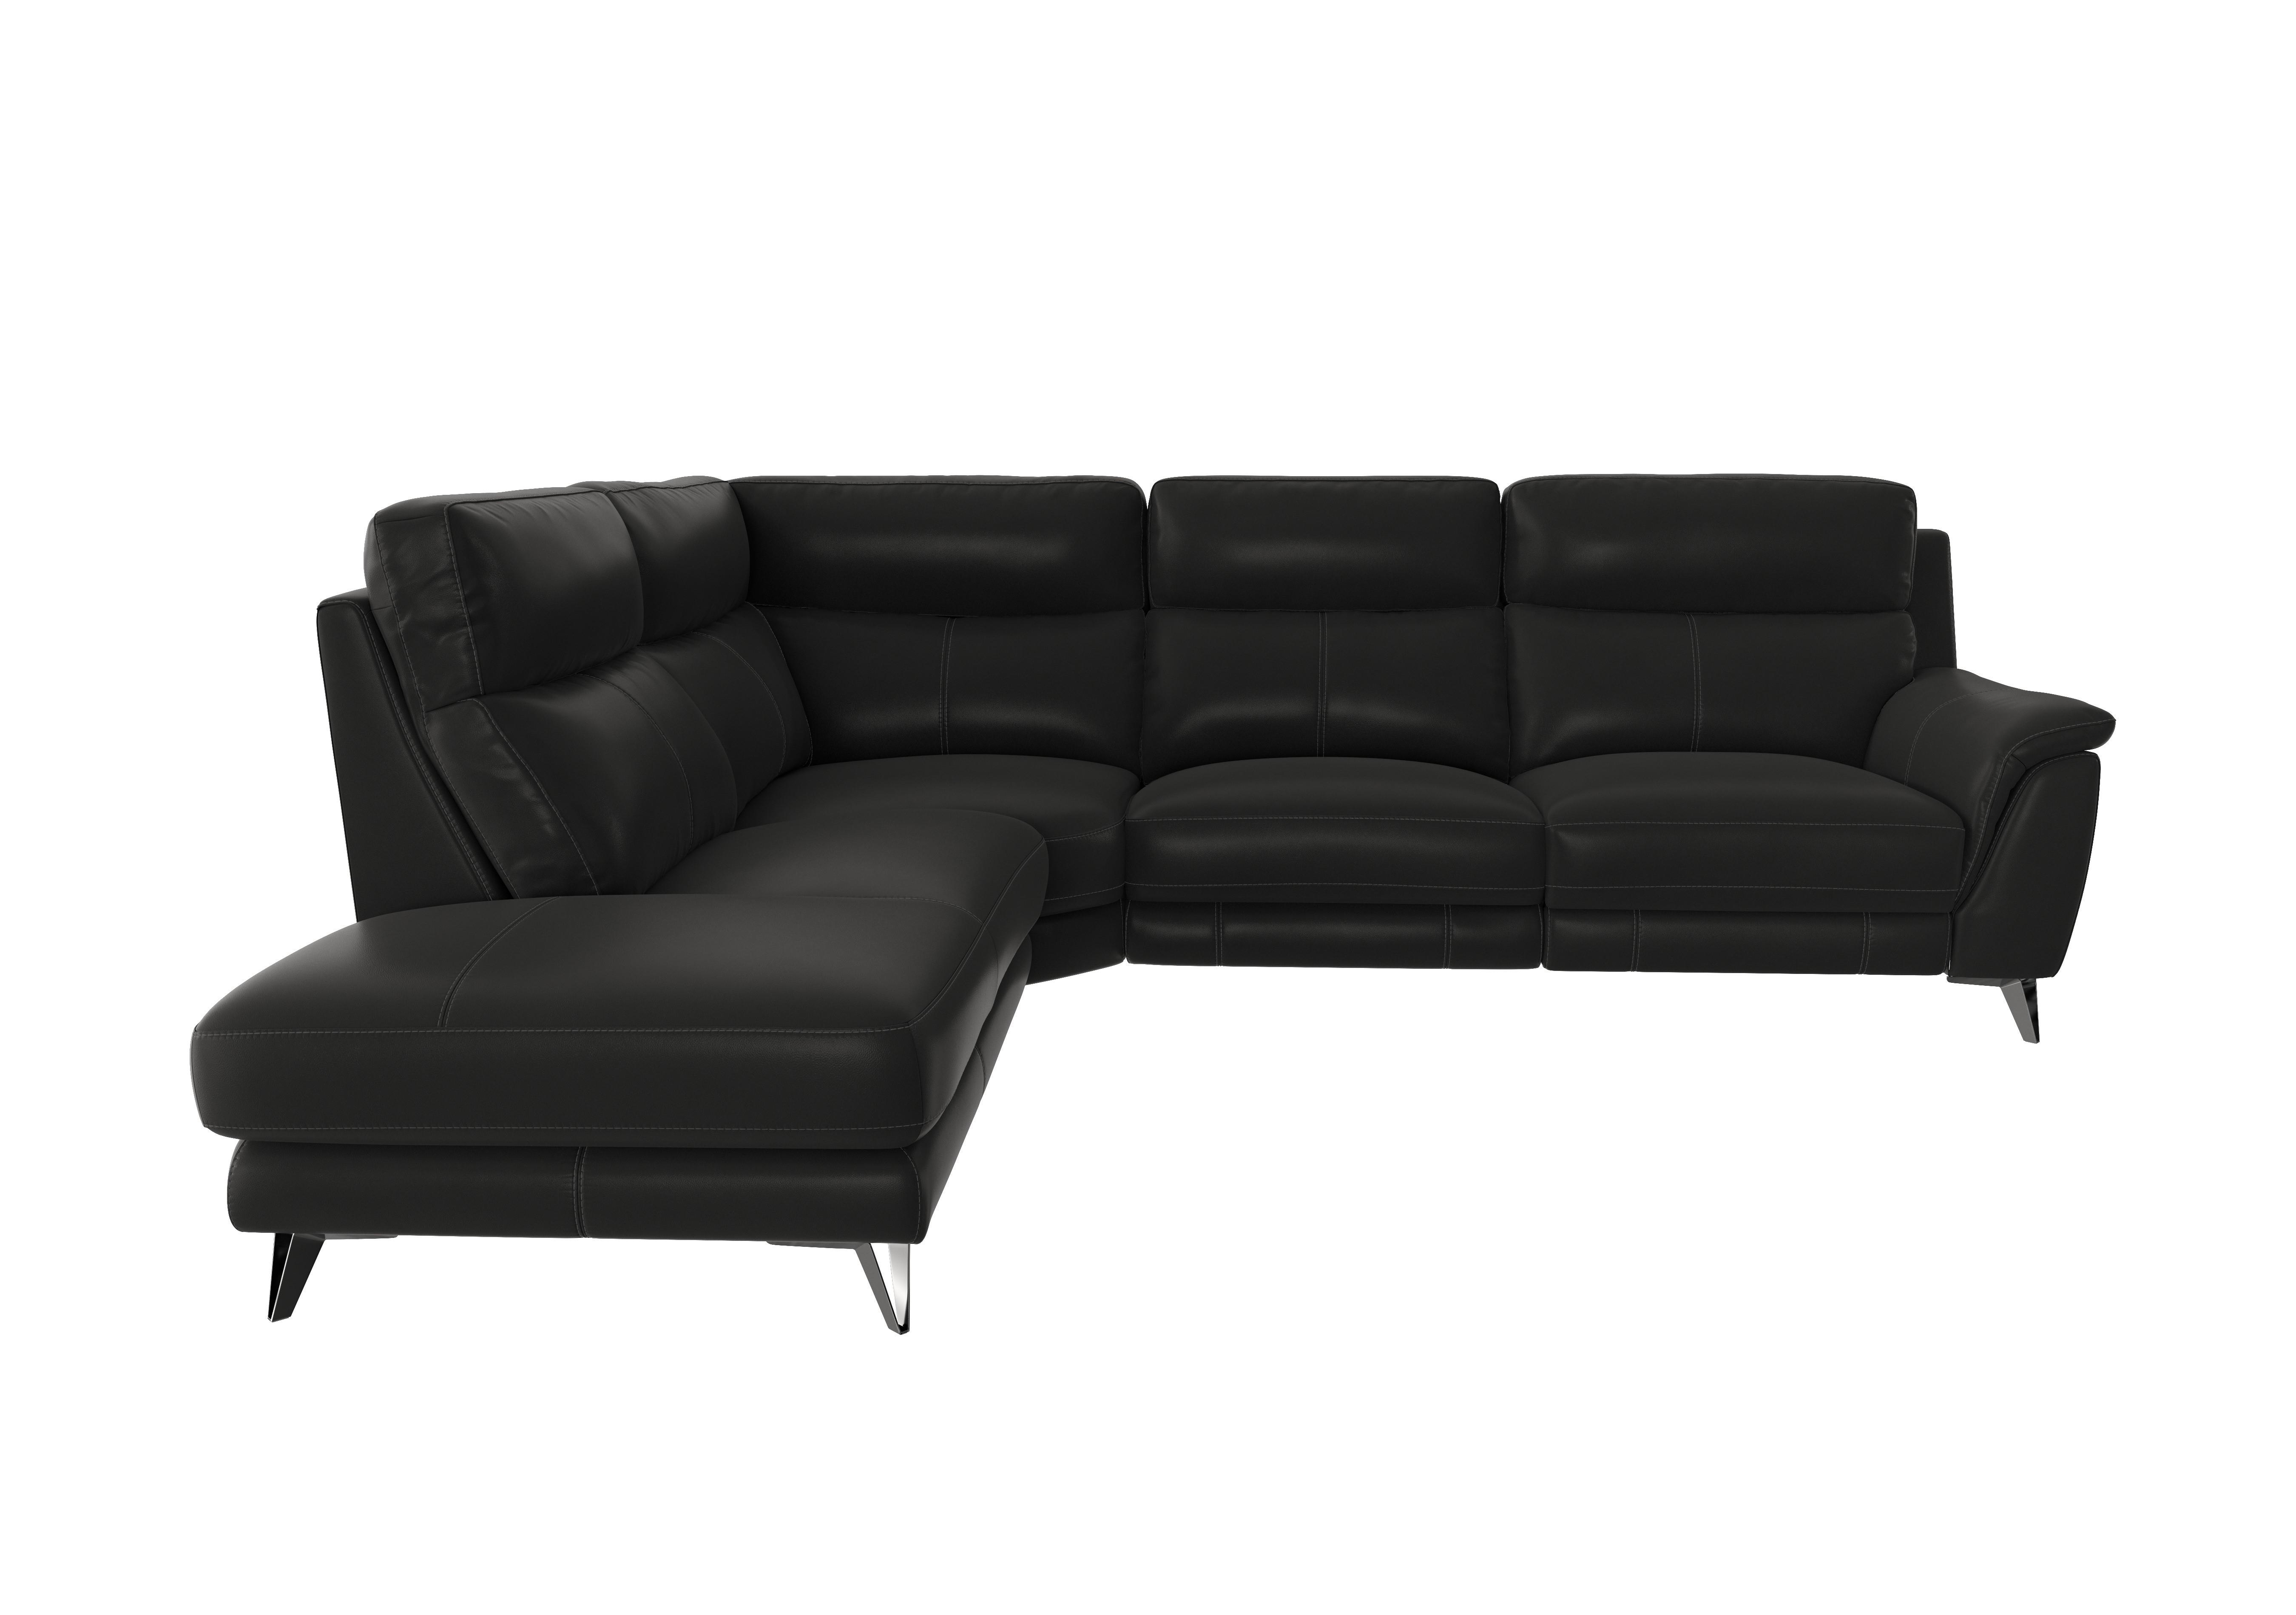 Contempo Chaise End Leather Sofa in Bv-3500 Classic Black on Furniture Village